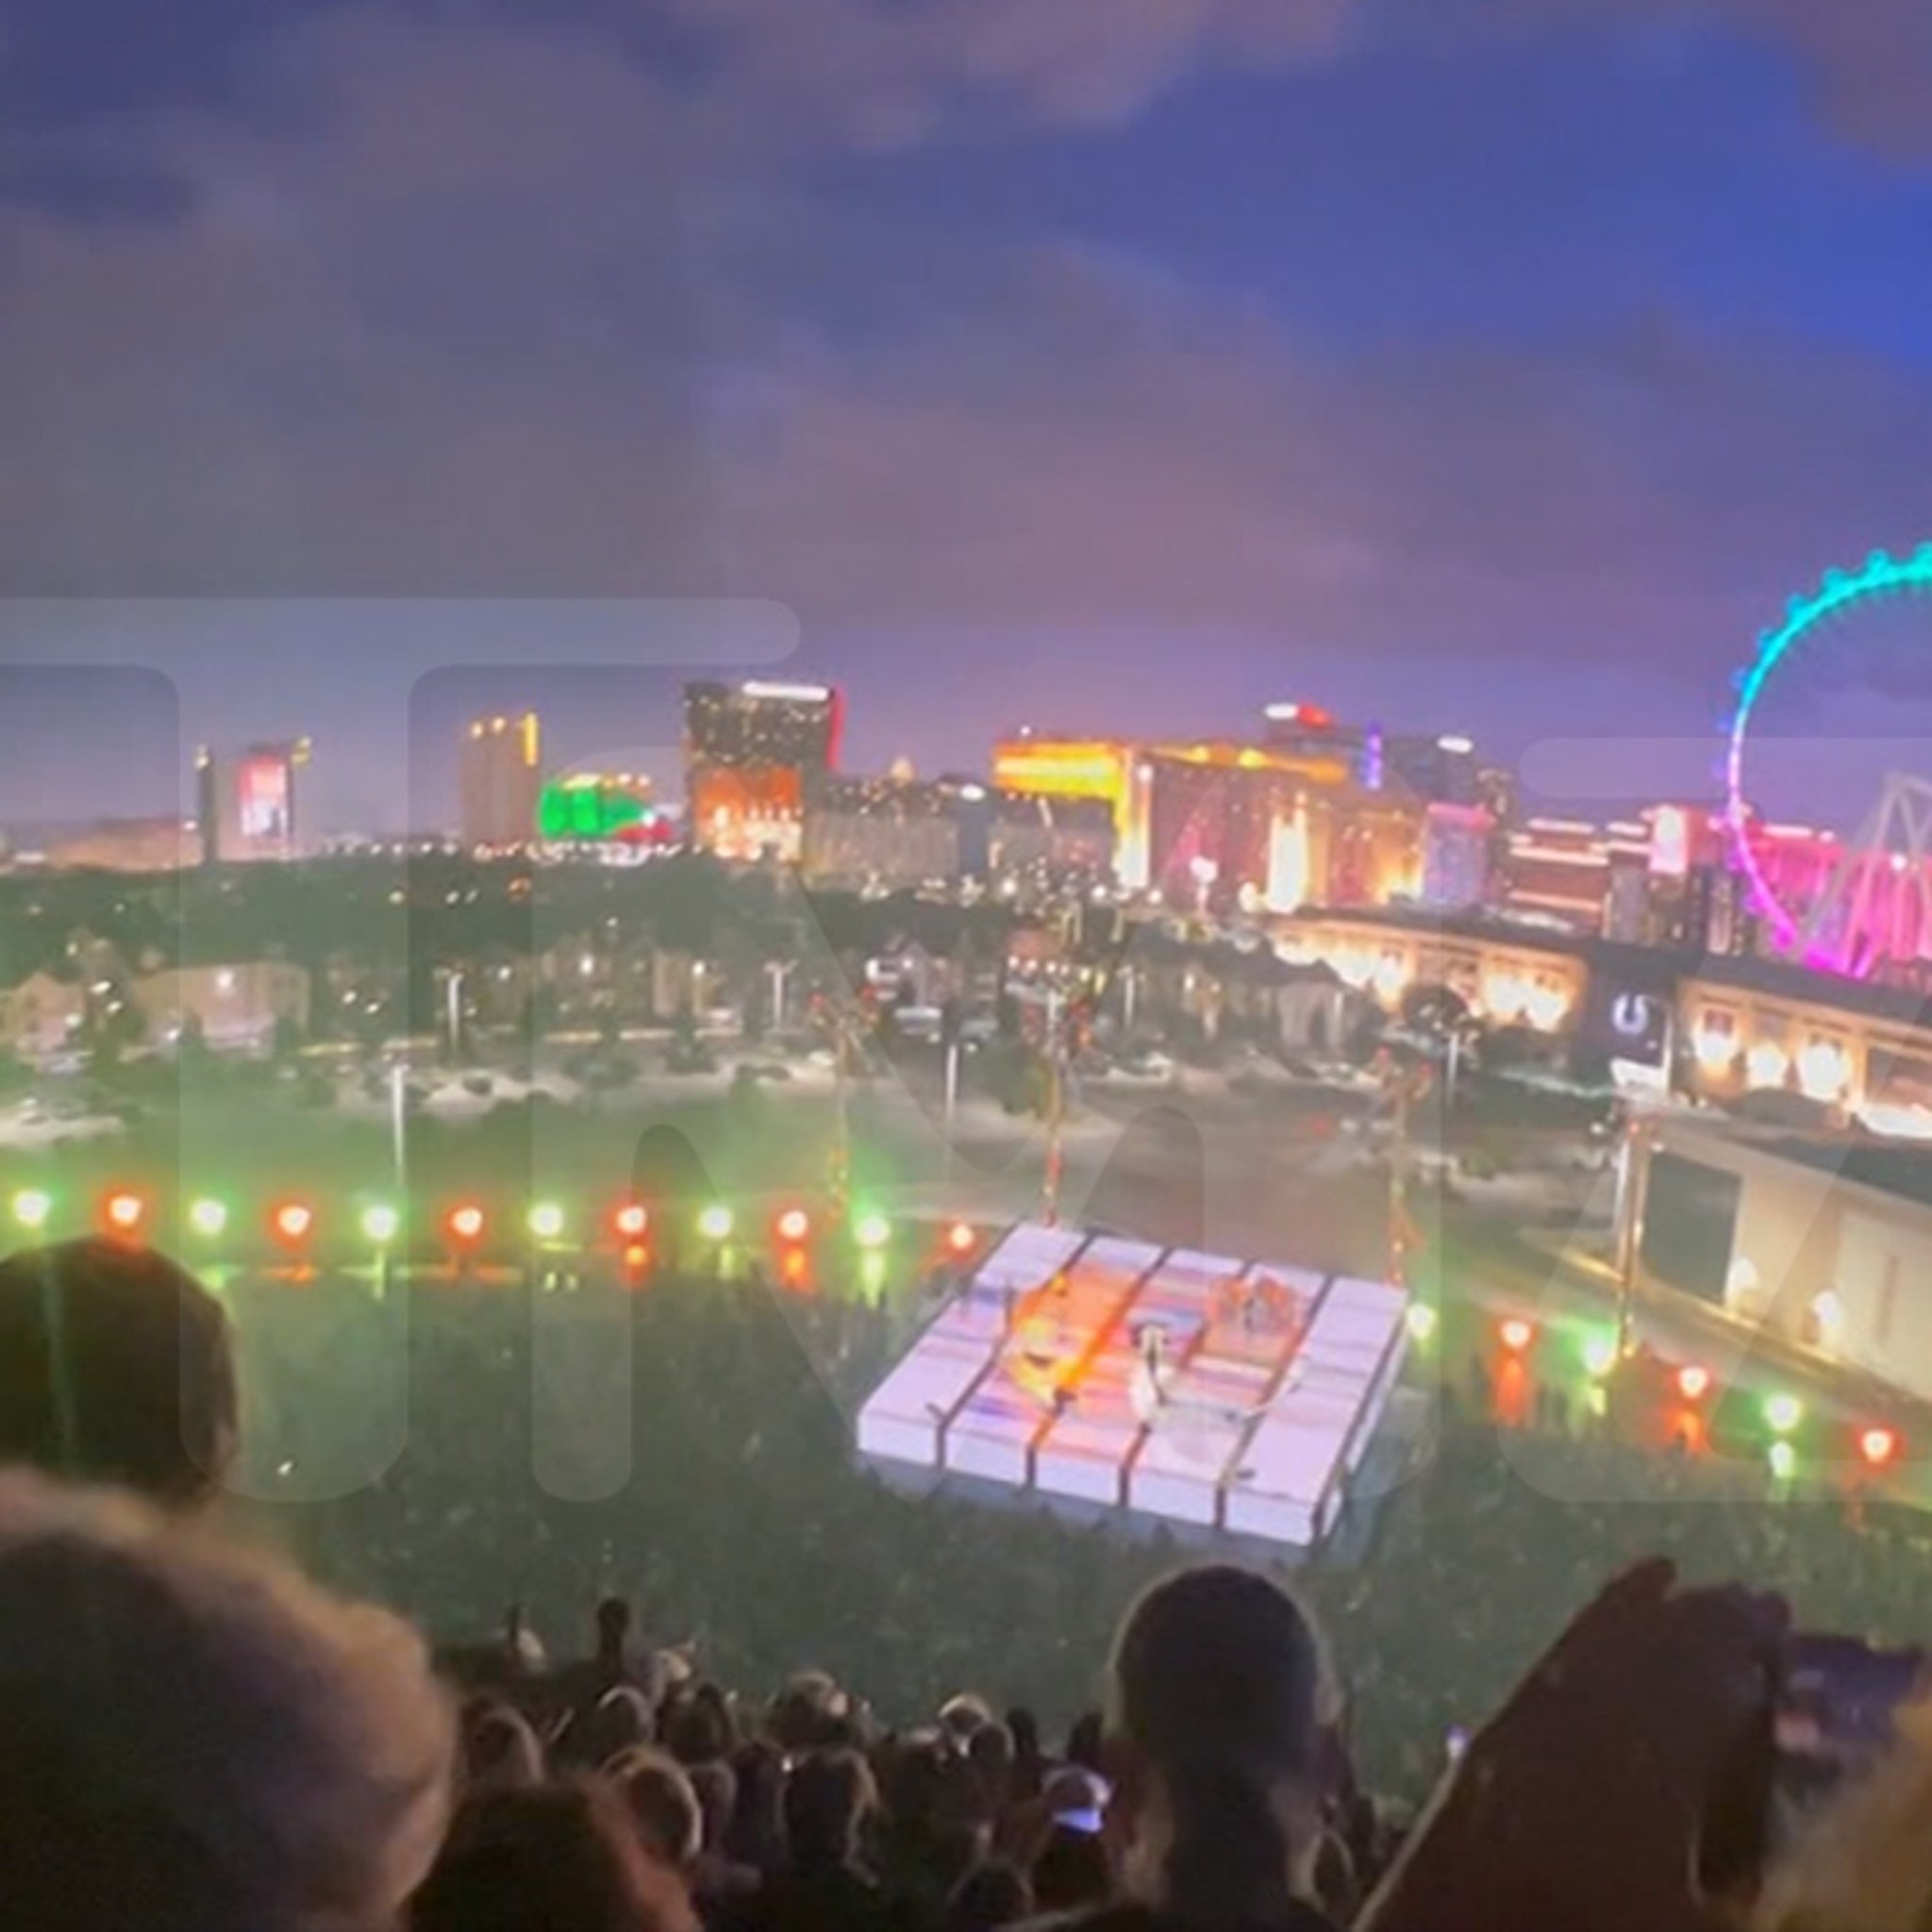 The game has truly changed. Footage from @Sphere opening night with @U, Sphere Las Vegas